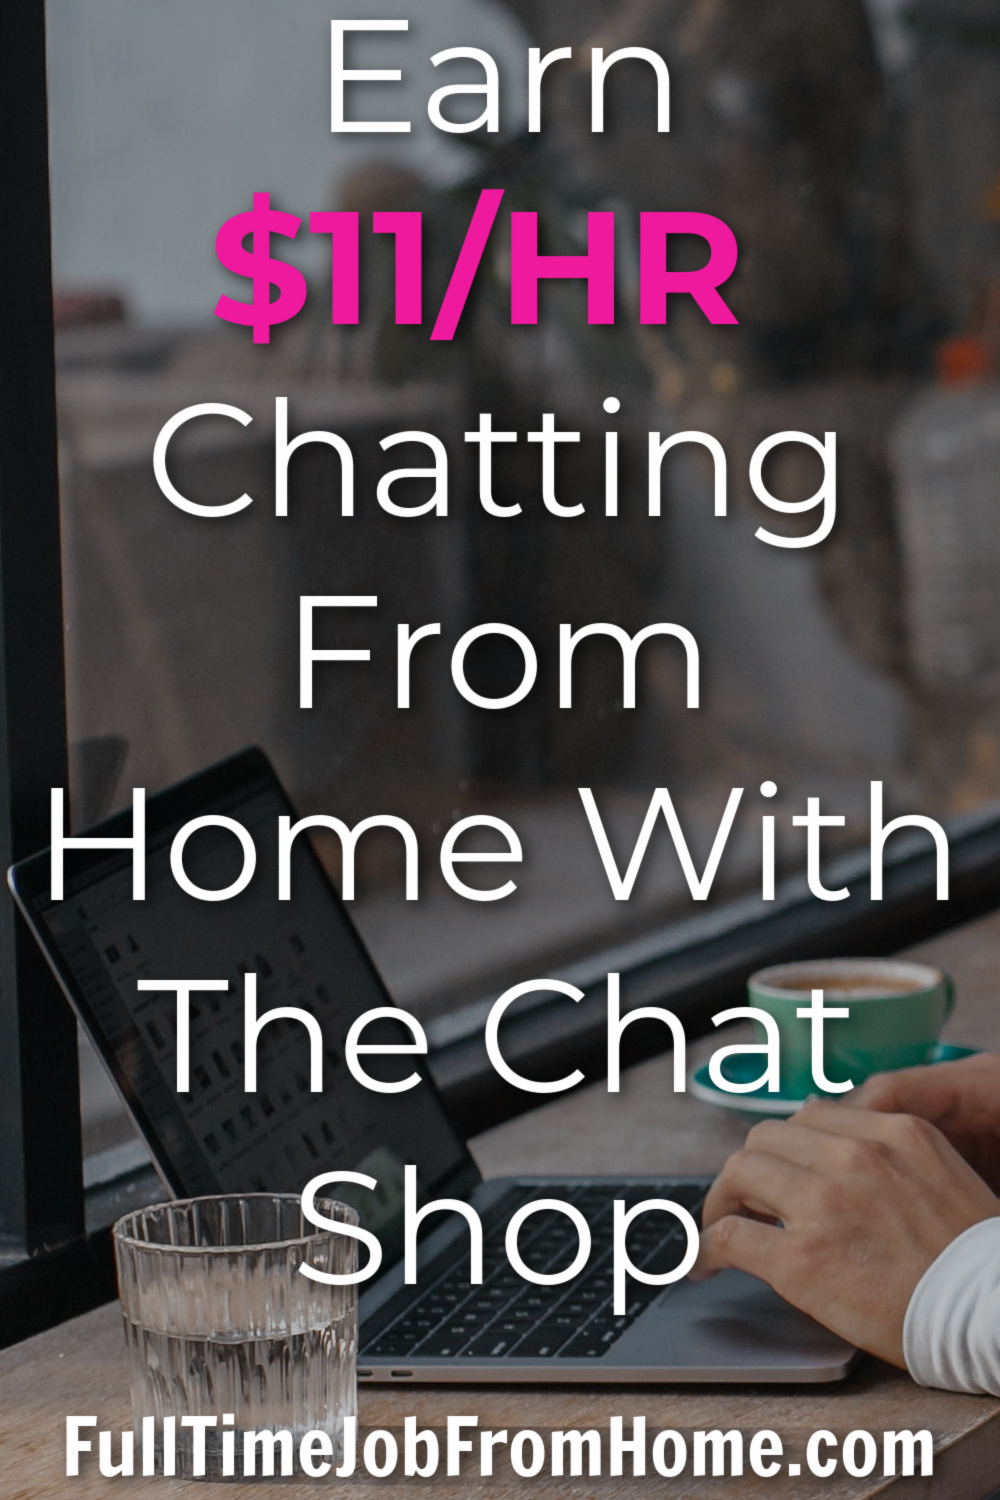 Learn How YOU Can Work From Home as a customer service chatter and make $11/HR at The Chat Shop